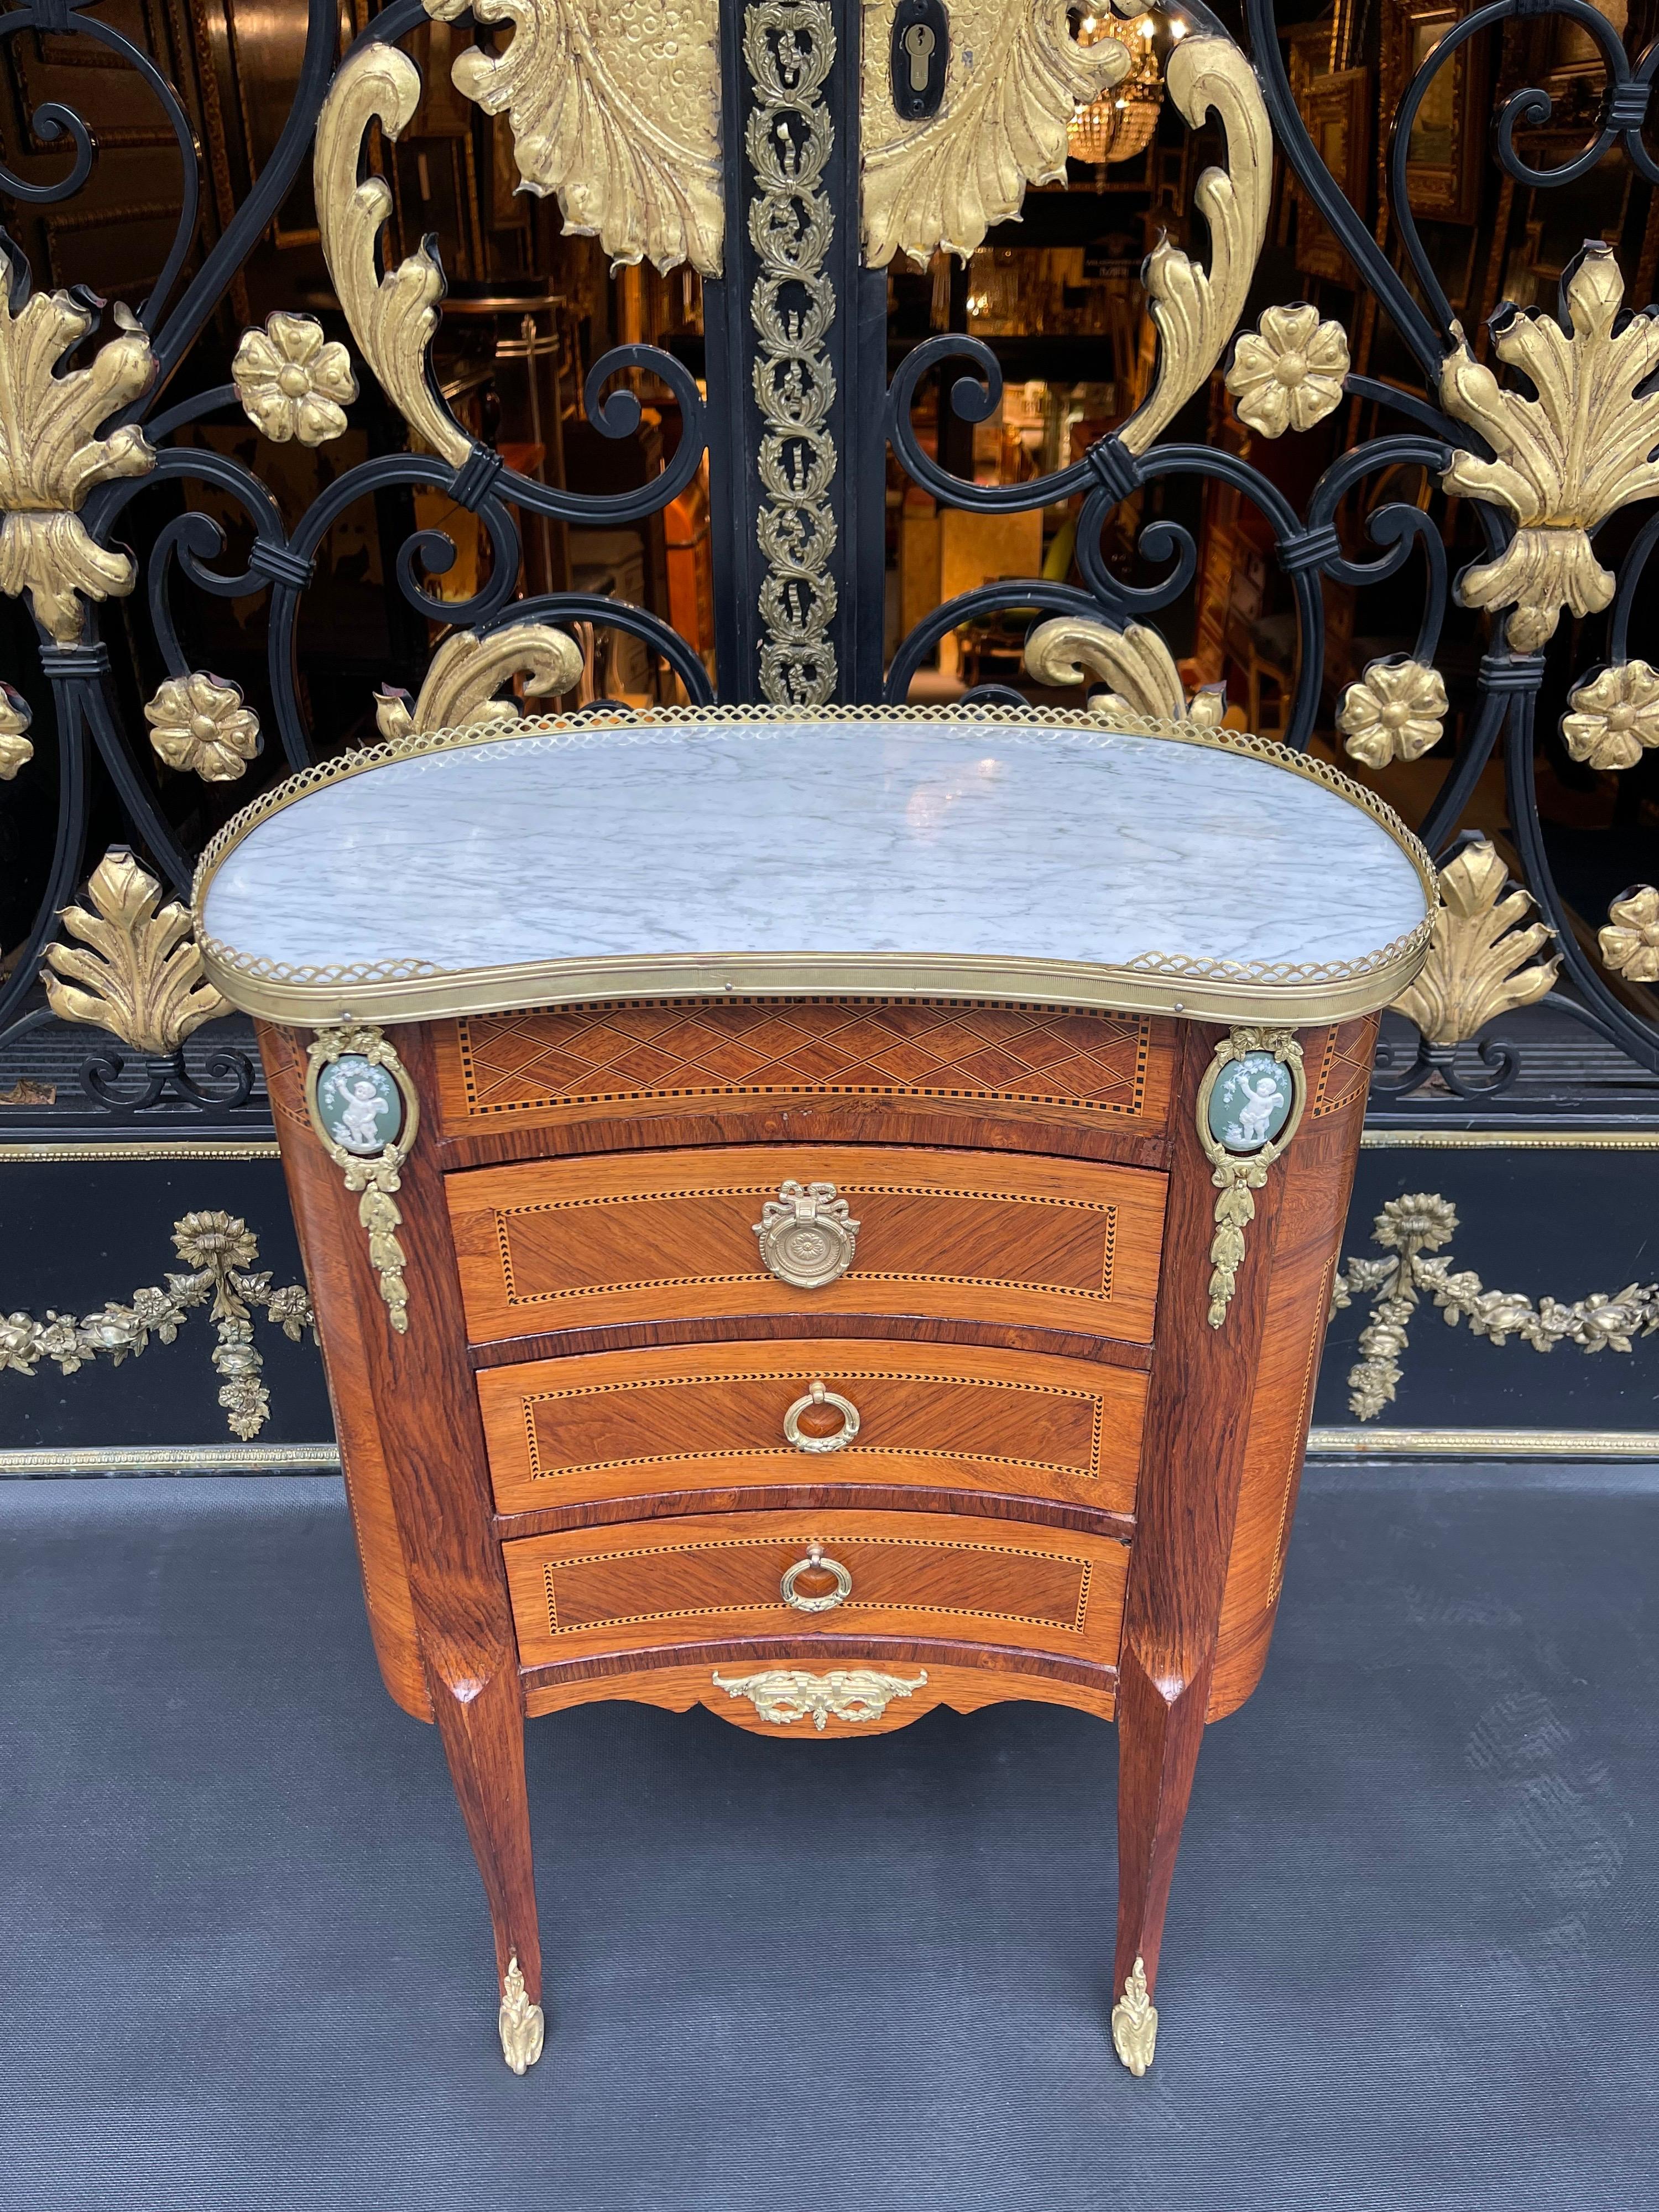 19th century royal side table, Paris. Fire-gilded, Louis XV

Majestic side table with extremely finely chased and gold-plated bronze fittings. Slightly convex and concave curved body, on high, elegantly curved legs that end in driving shoes.